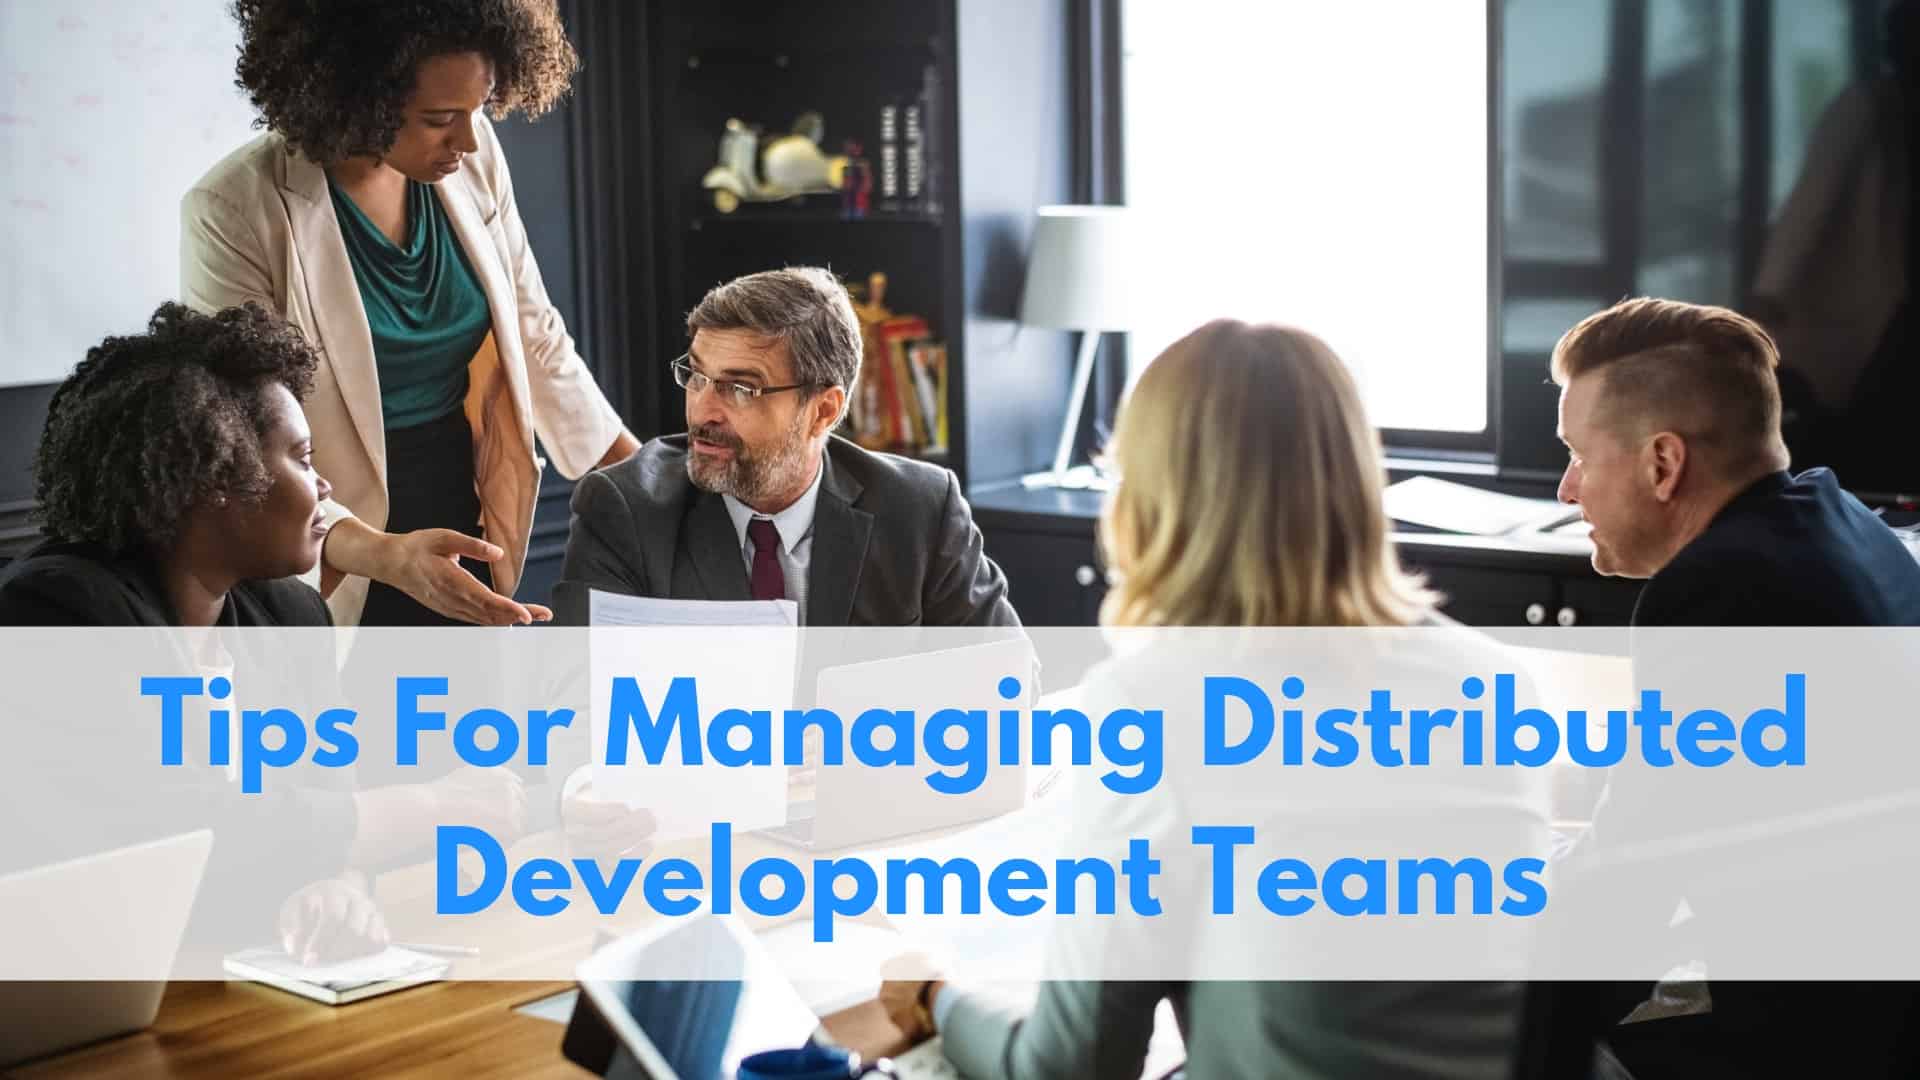 Tips For Managing Distributed Development Teams